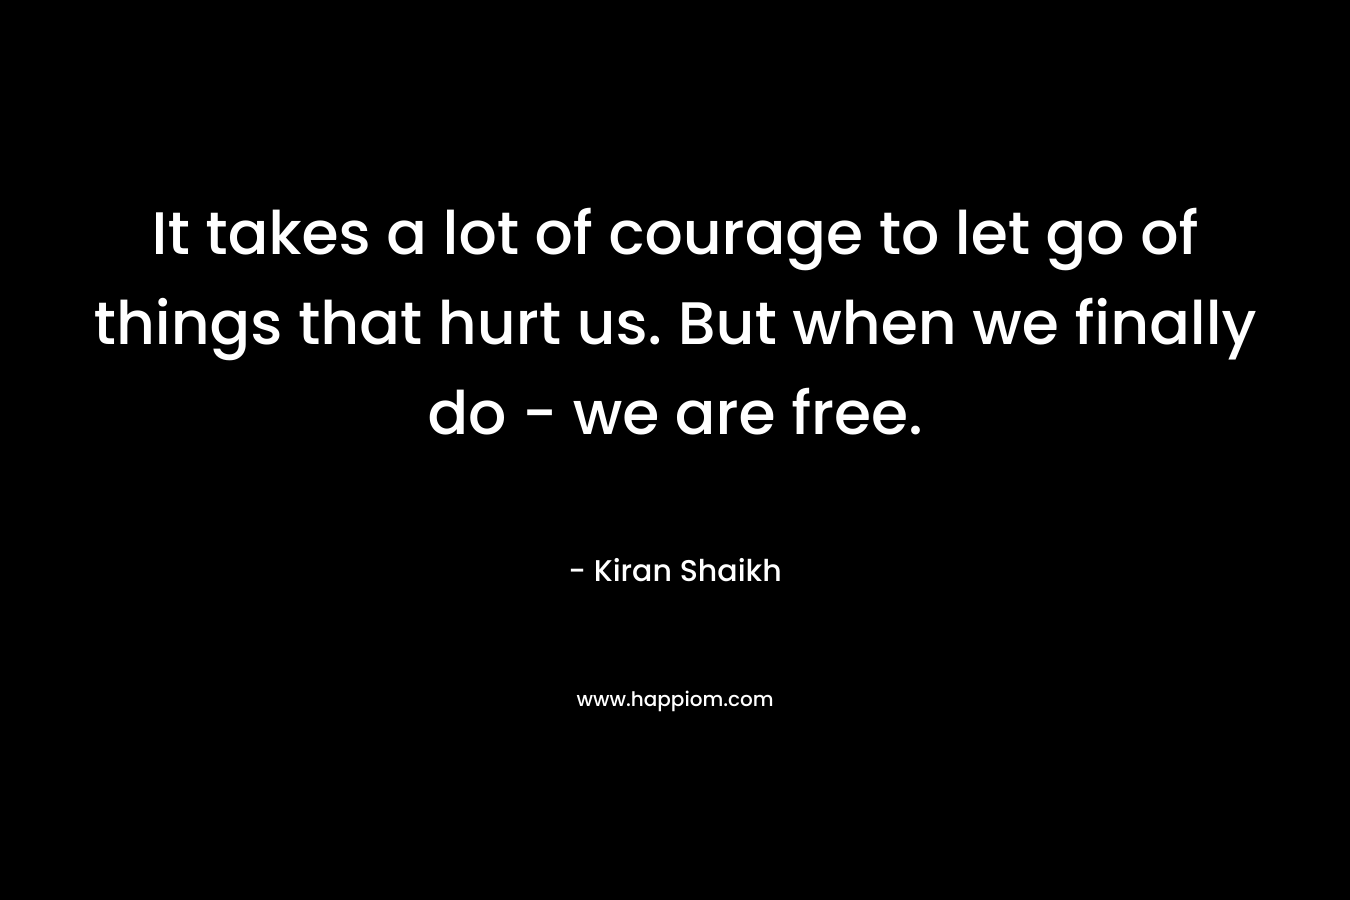 It takes a lot of courage to let go of things that hurt us. But when we finally do – we are free. – Kiran Shaikh